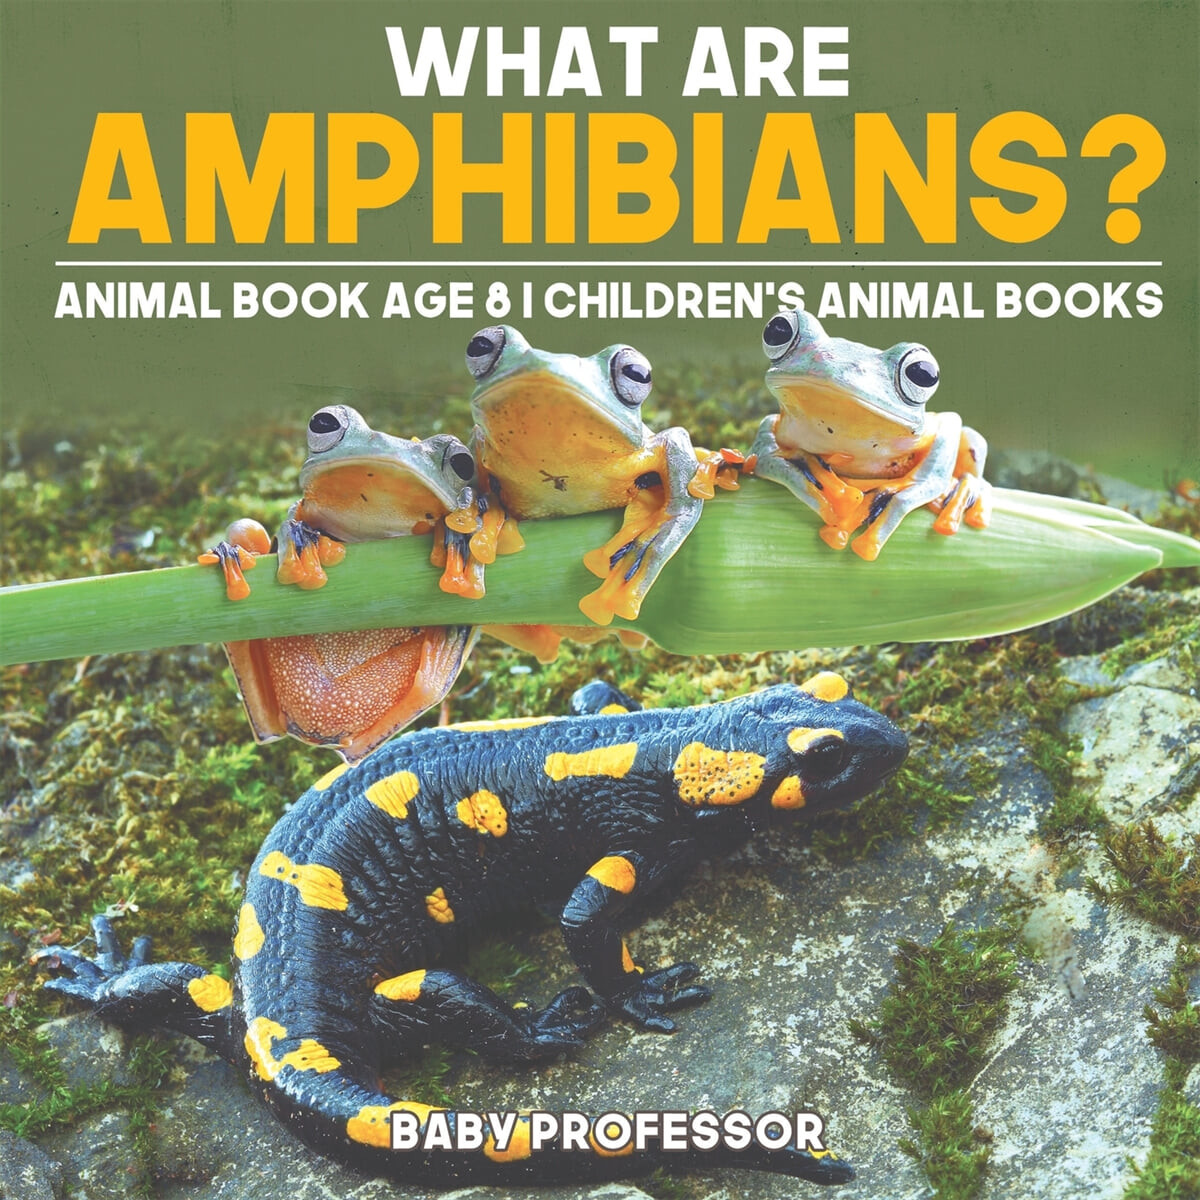 What are Amphibians? Animal Book Age 8 - Children’s Animal Books